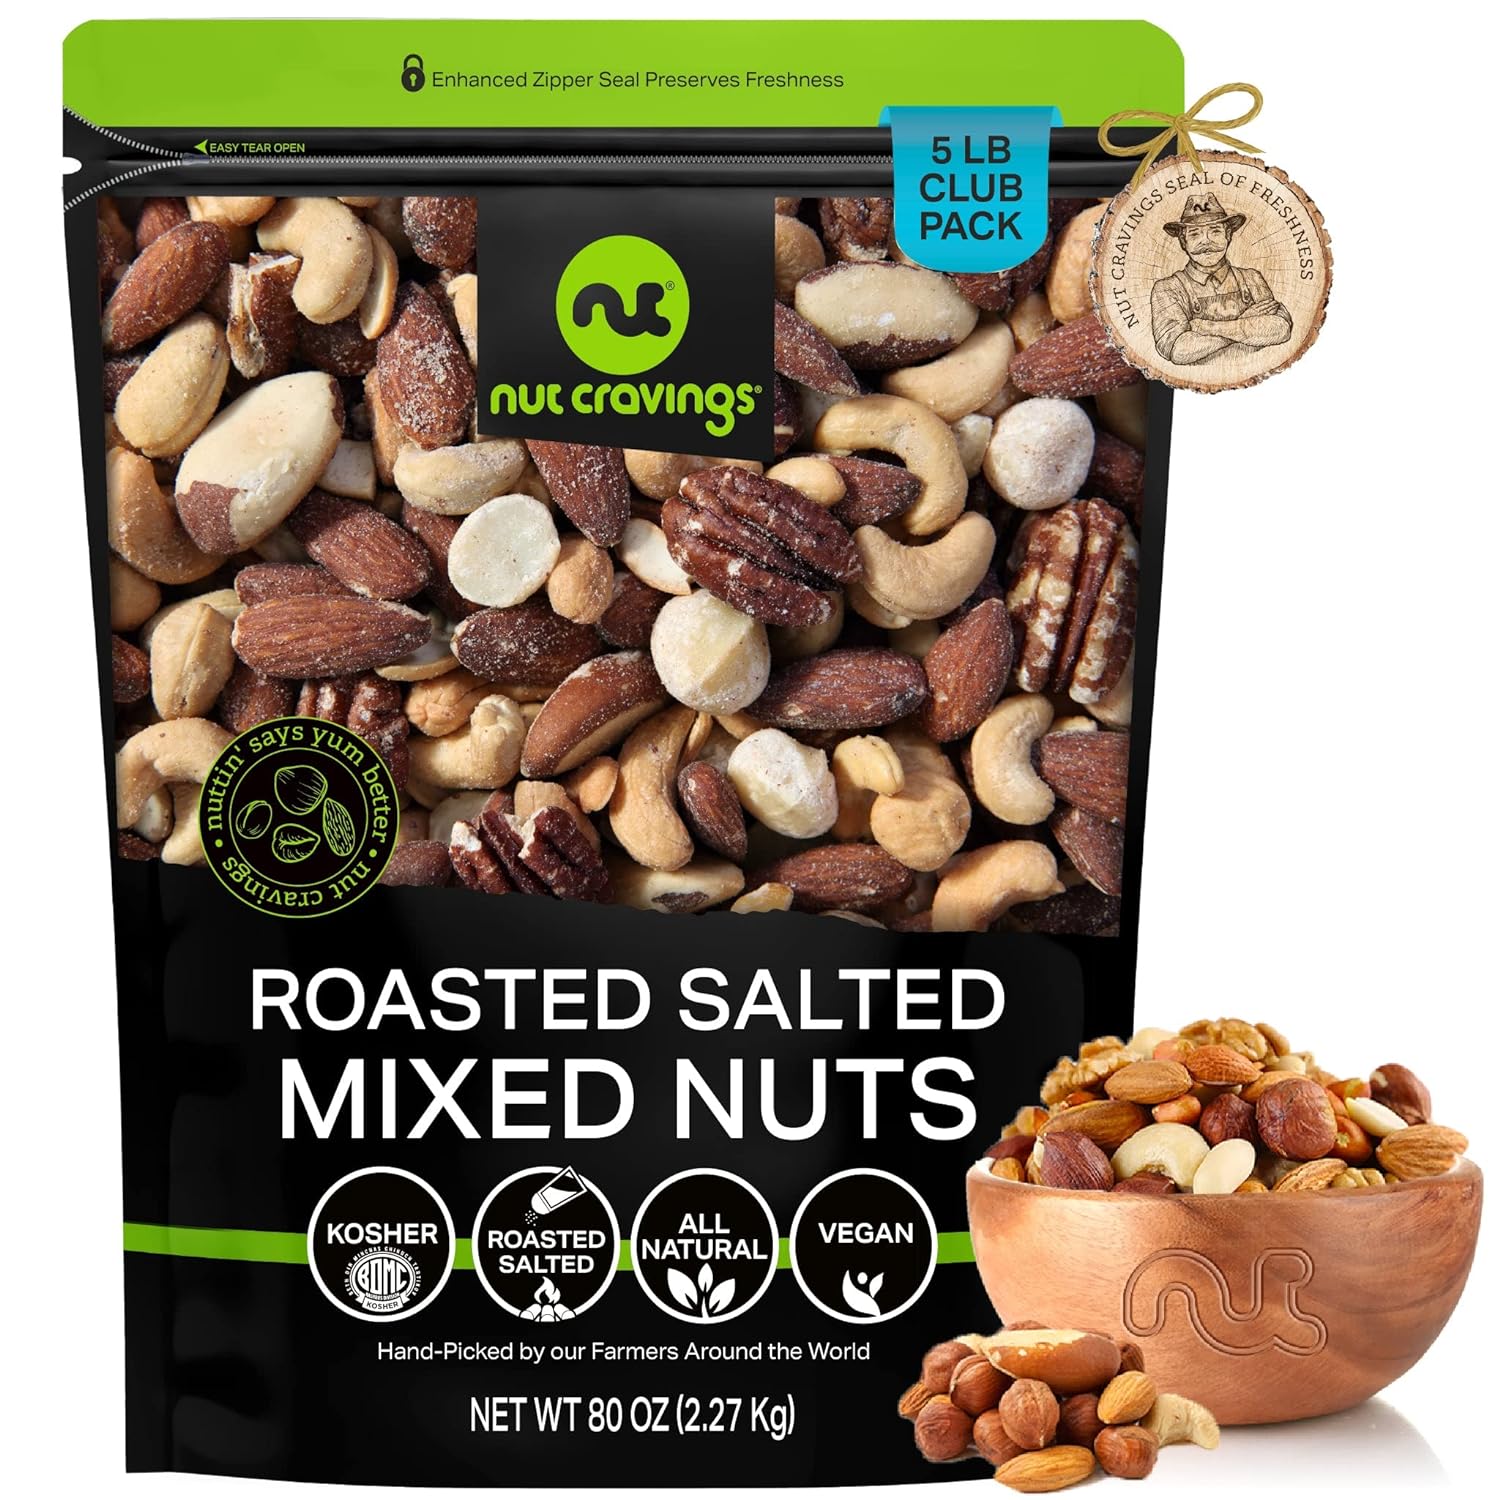 Nut Cravings - Roasted & Salted Mixed Nuts - Brazil, Pecan, Almond, Hazelnut, Cashew (80oz - 5 LB) Packed Fresh in Resealable Bag - Healthy Protein Food, All Natural, Keto Friendly, Vegan, Kosher